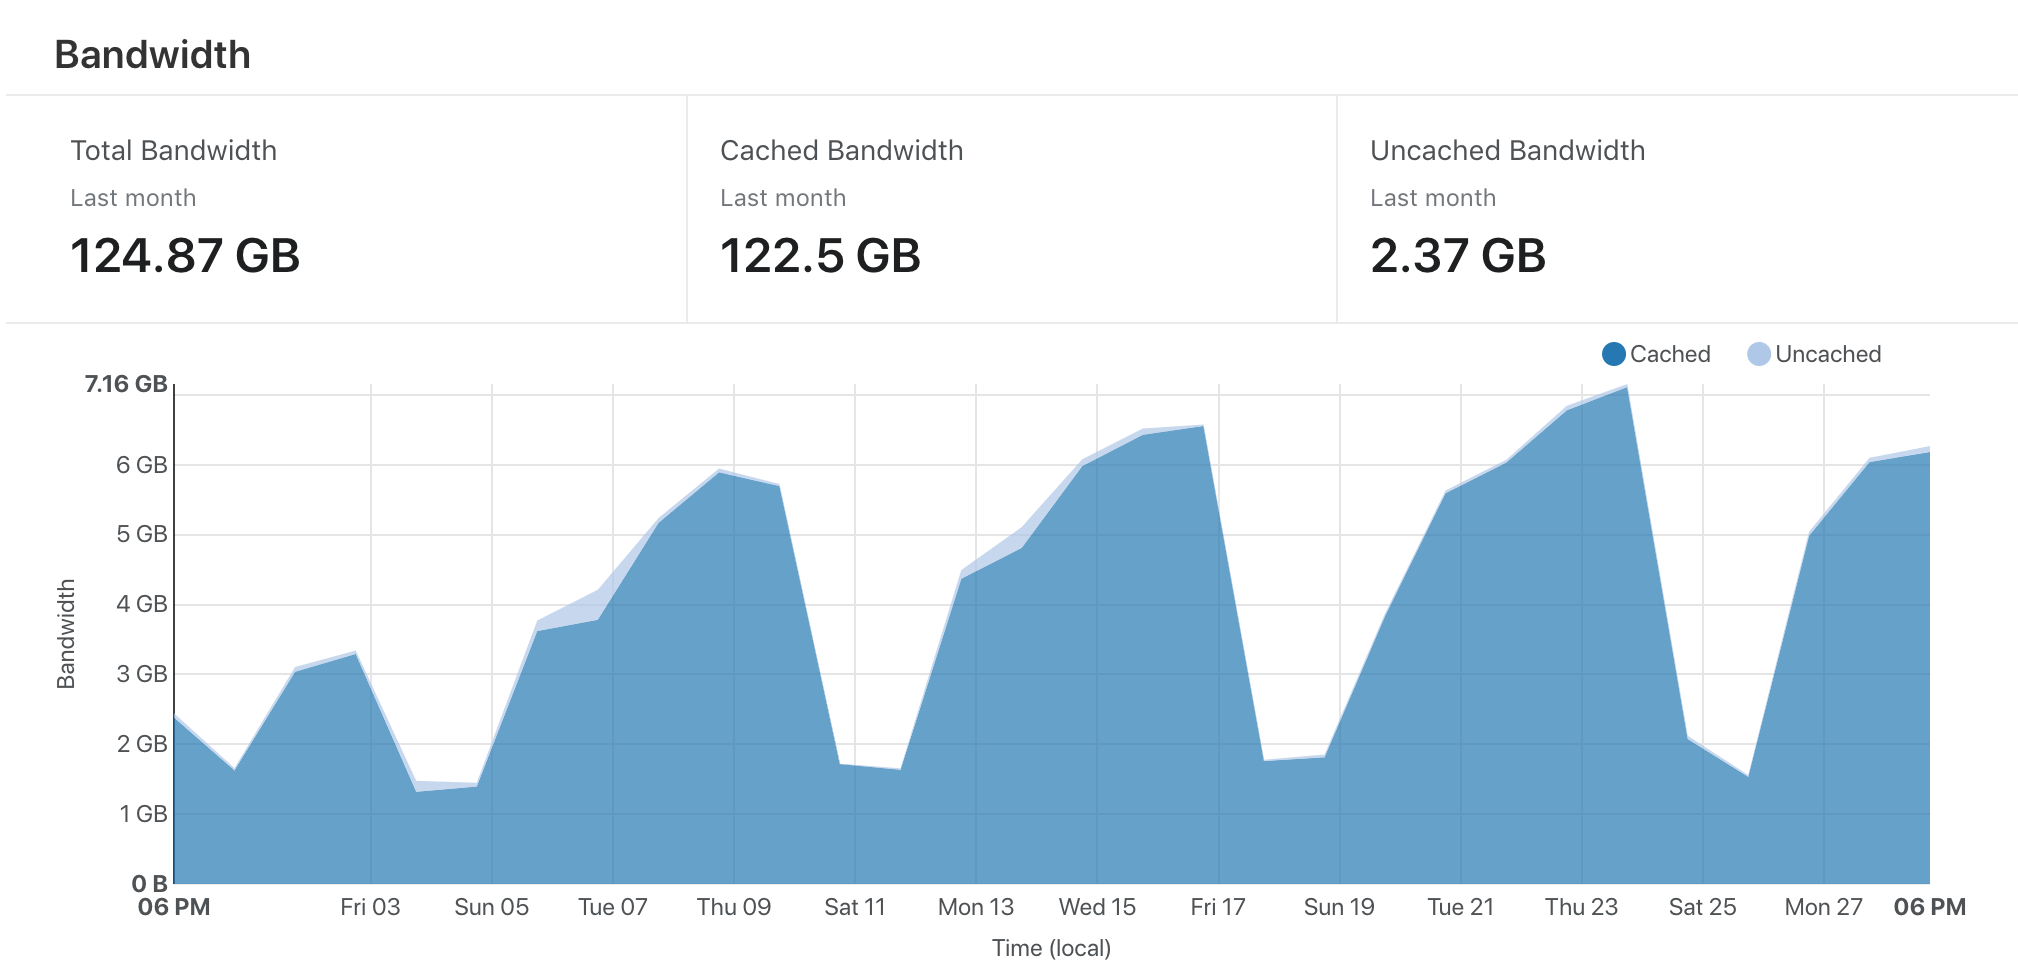 122.5GB cached bandwidth in a month, 2.37GB uncached.